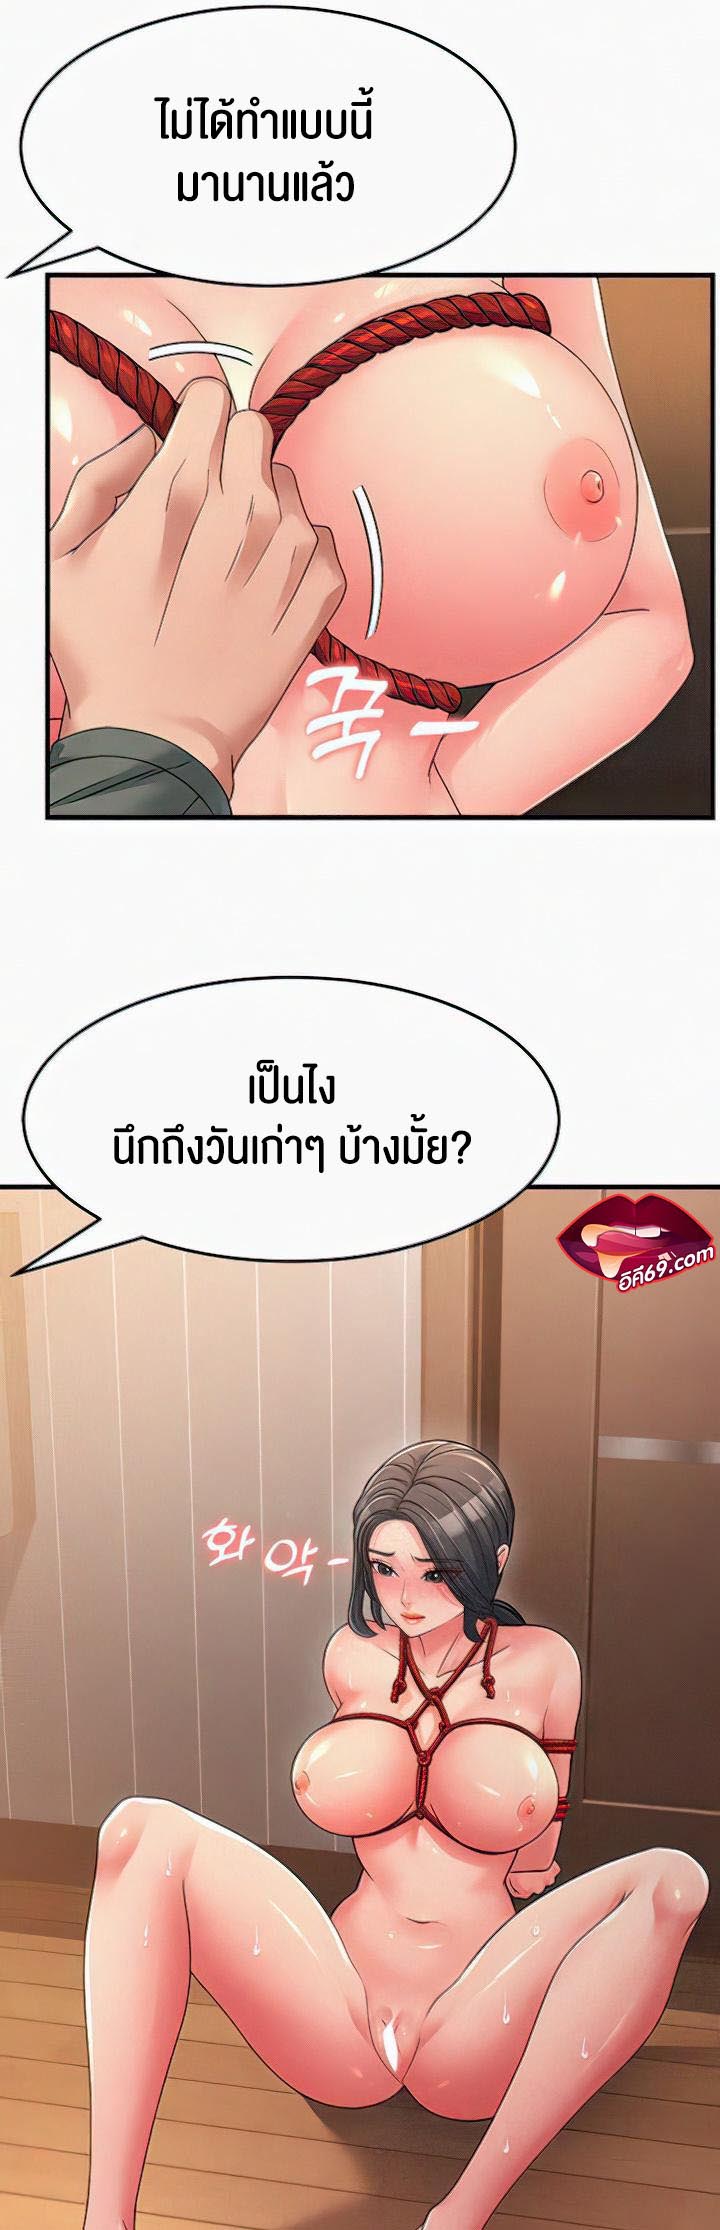 à¸­à¹ˆà¸²à¸™à¹‚à¸”à¸ˆà¸´à¸™ à¹€à¸£à¸·à¹ˆà¸­à¸‡ Mother in Law Bends To My Will 6 17